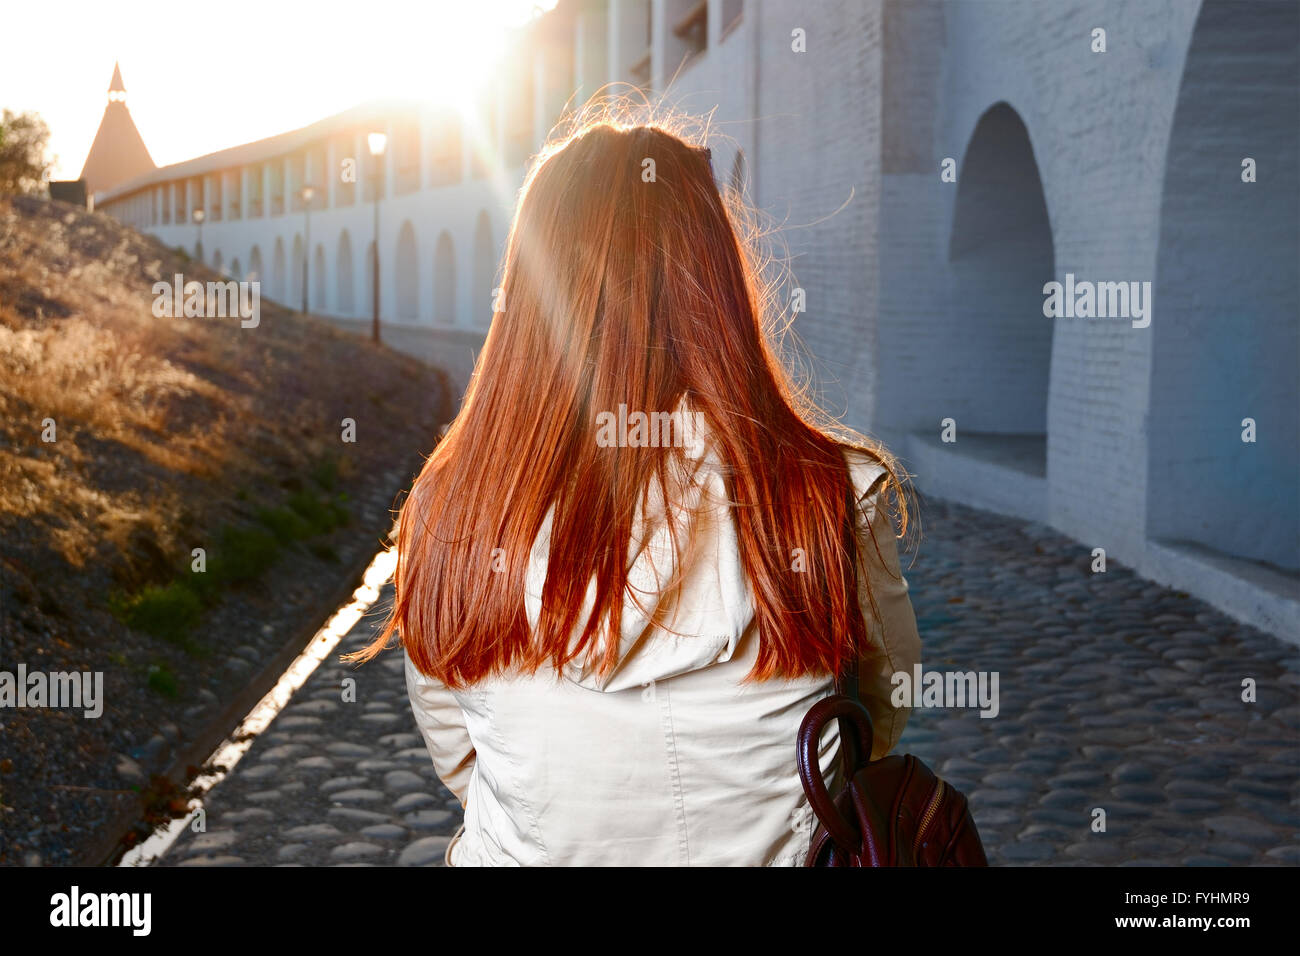 Rear view of red haired woman walking in the street near old fortress in europe backlit with sunflares Stock Photo